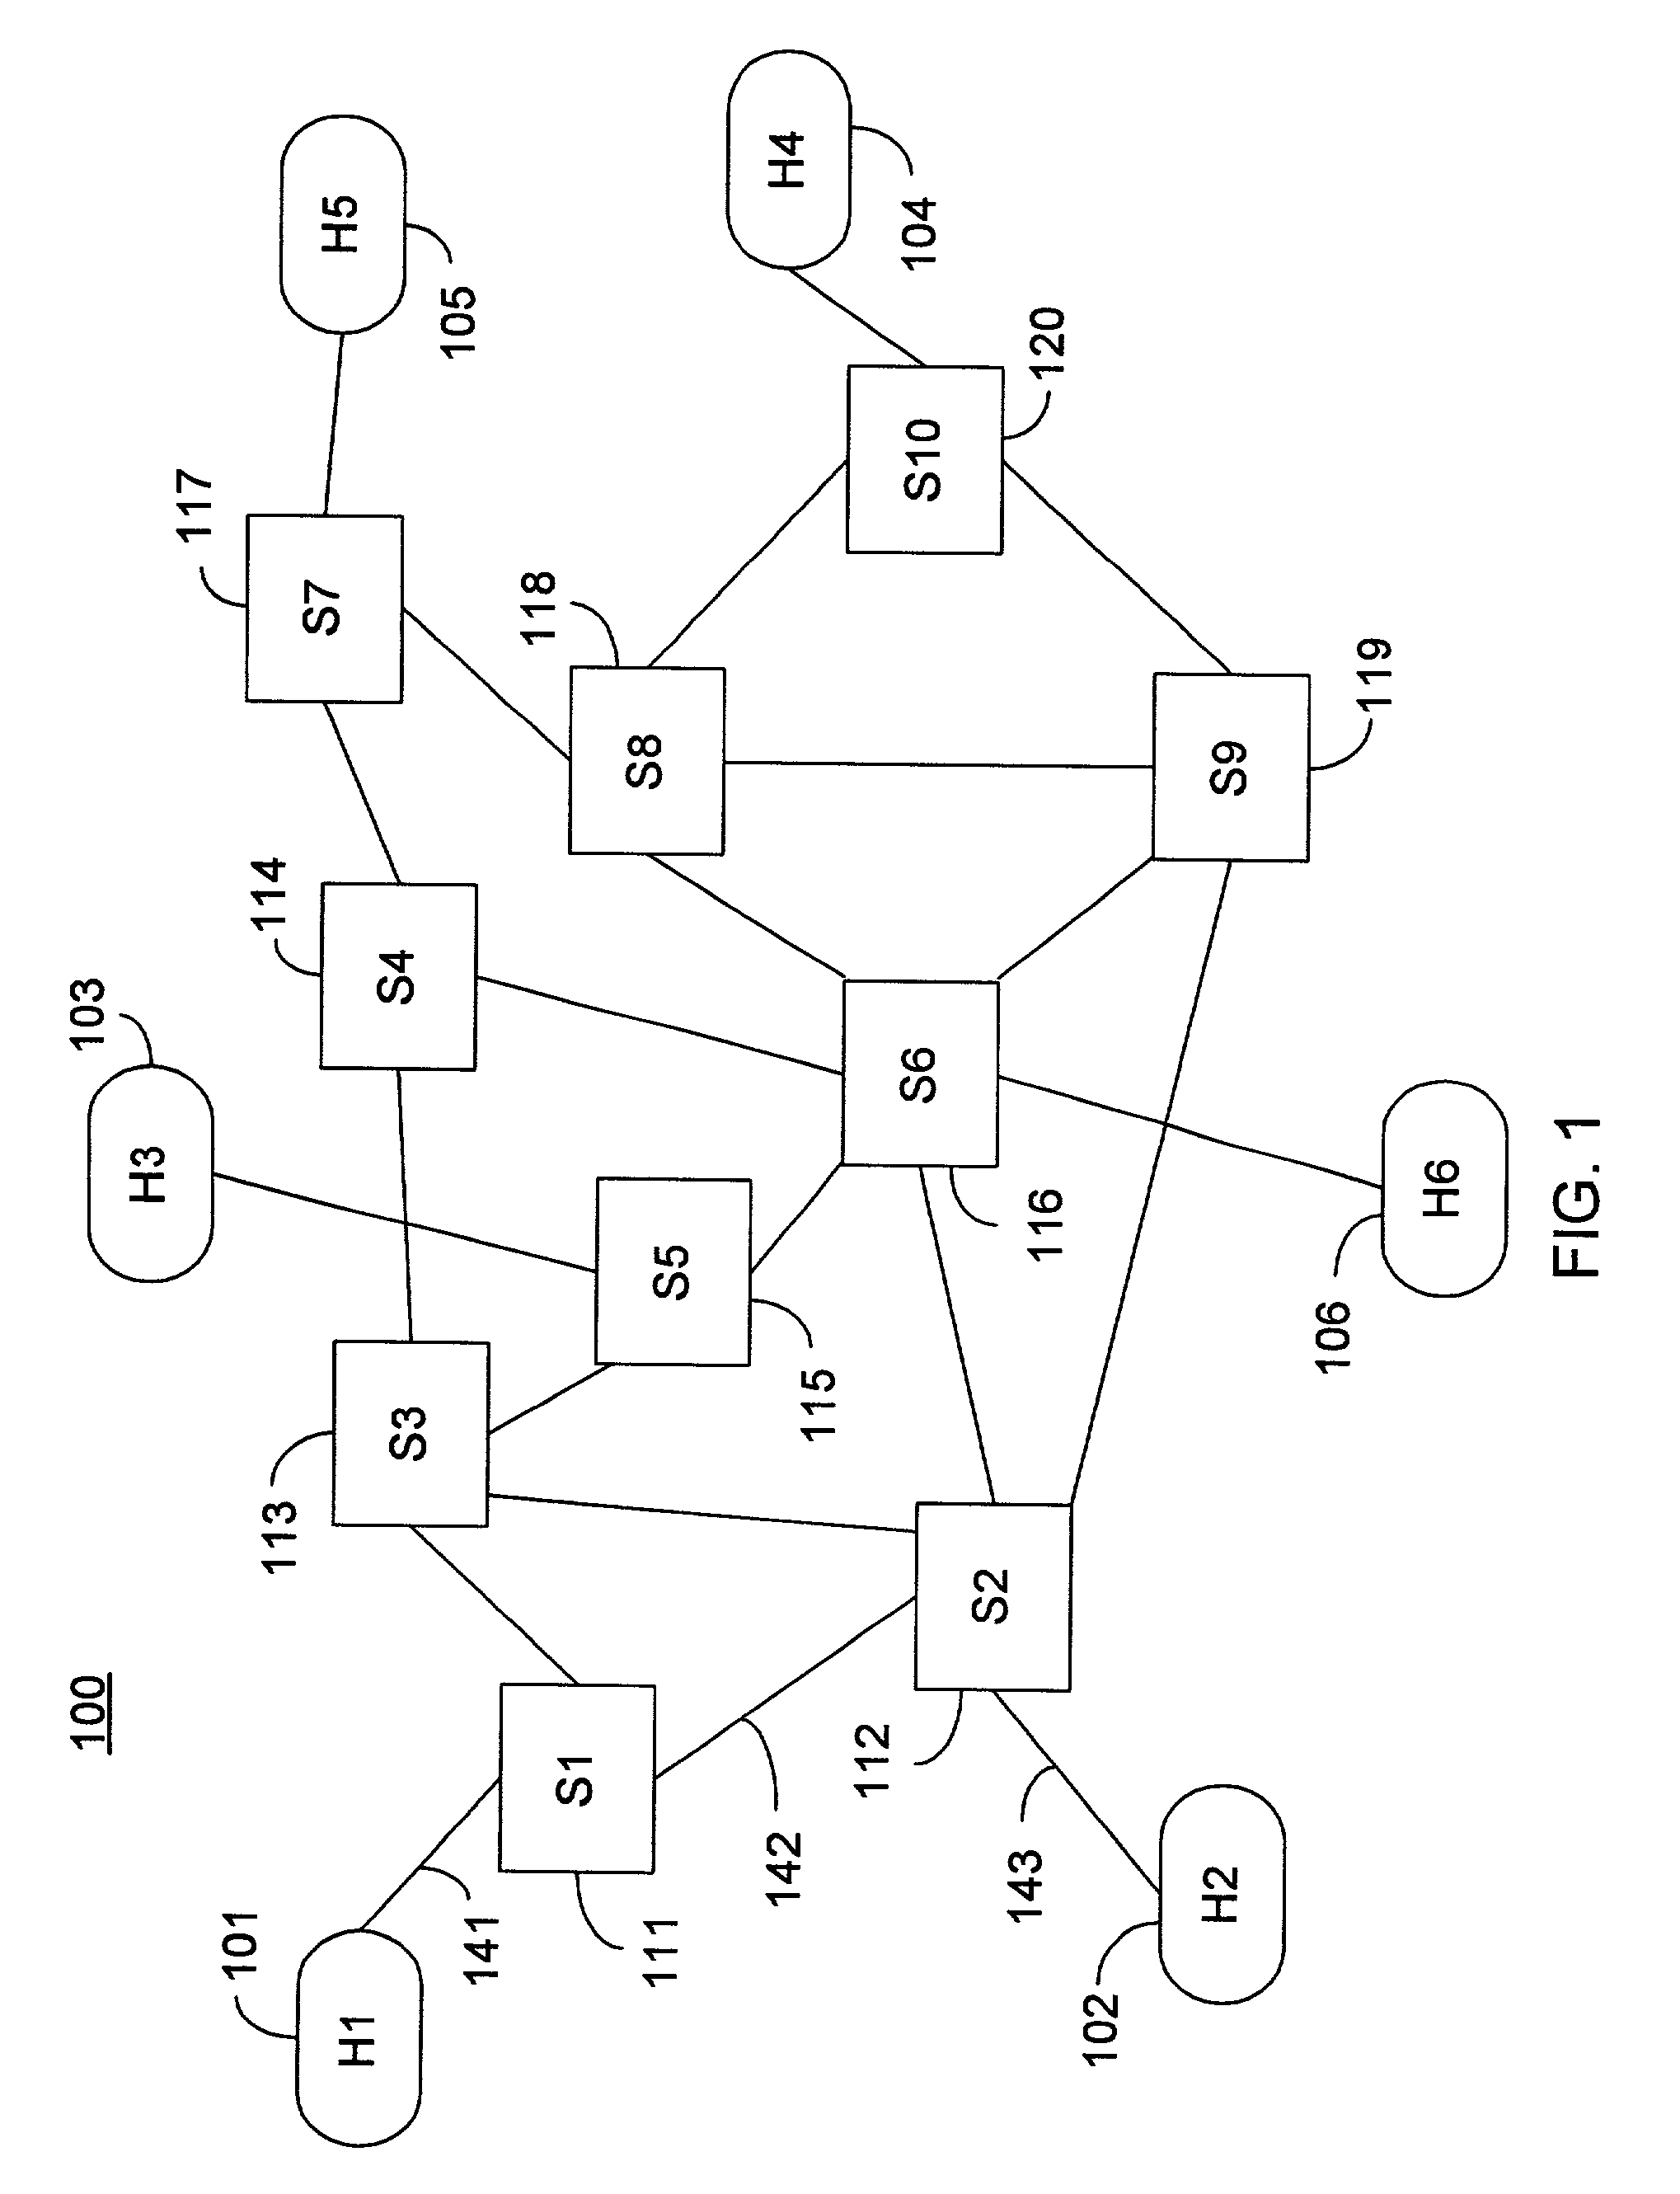 Determination of connection links to configure a virtual private network